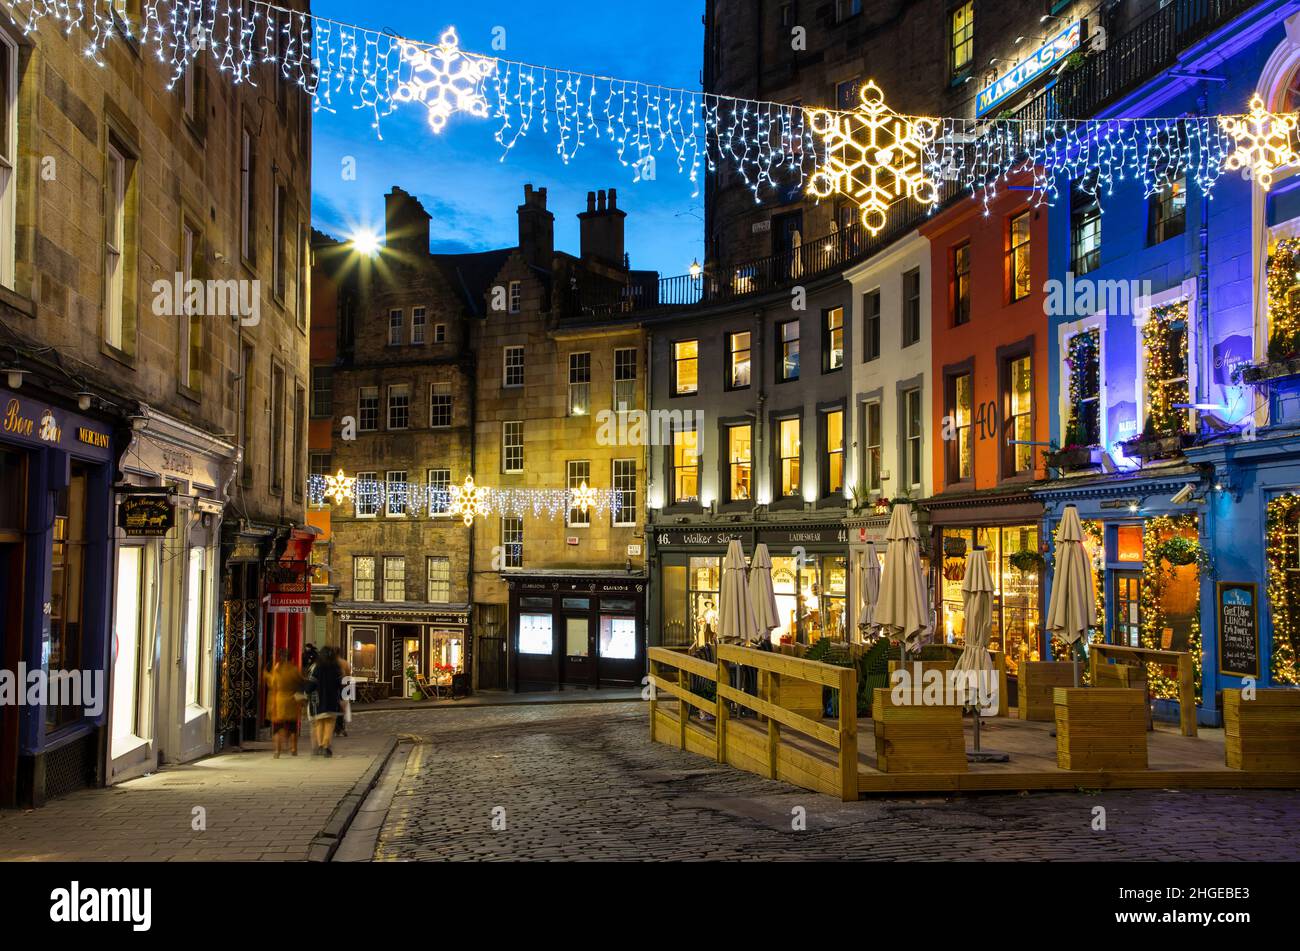 Edinburgh, UK - January 4th, 2022: Victoria Street is at the pretty part of Old Town Edinburgh with a long stretch of colourful storefronts and restau Stock Photo